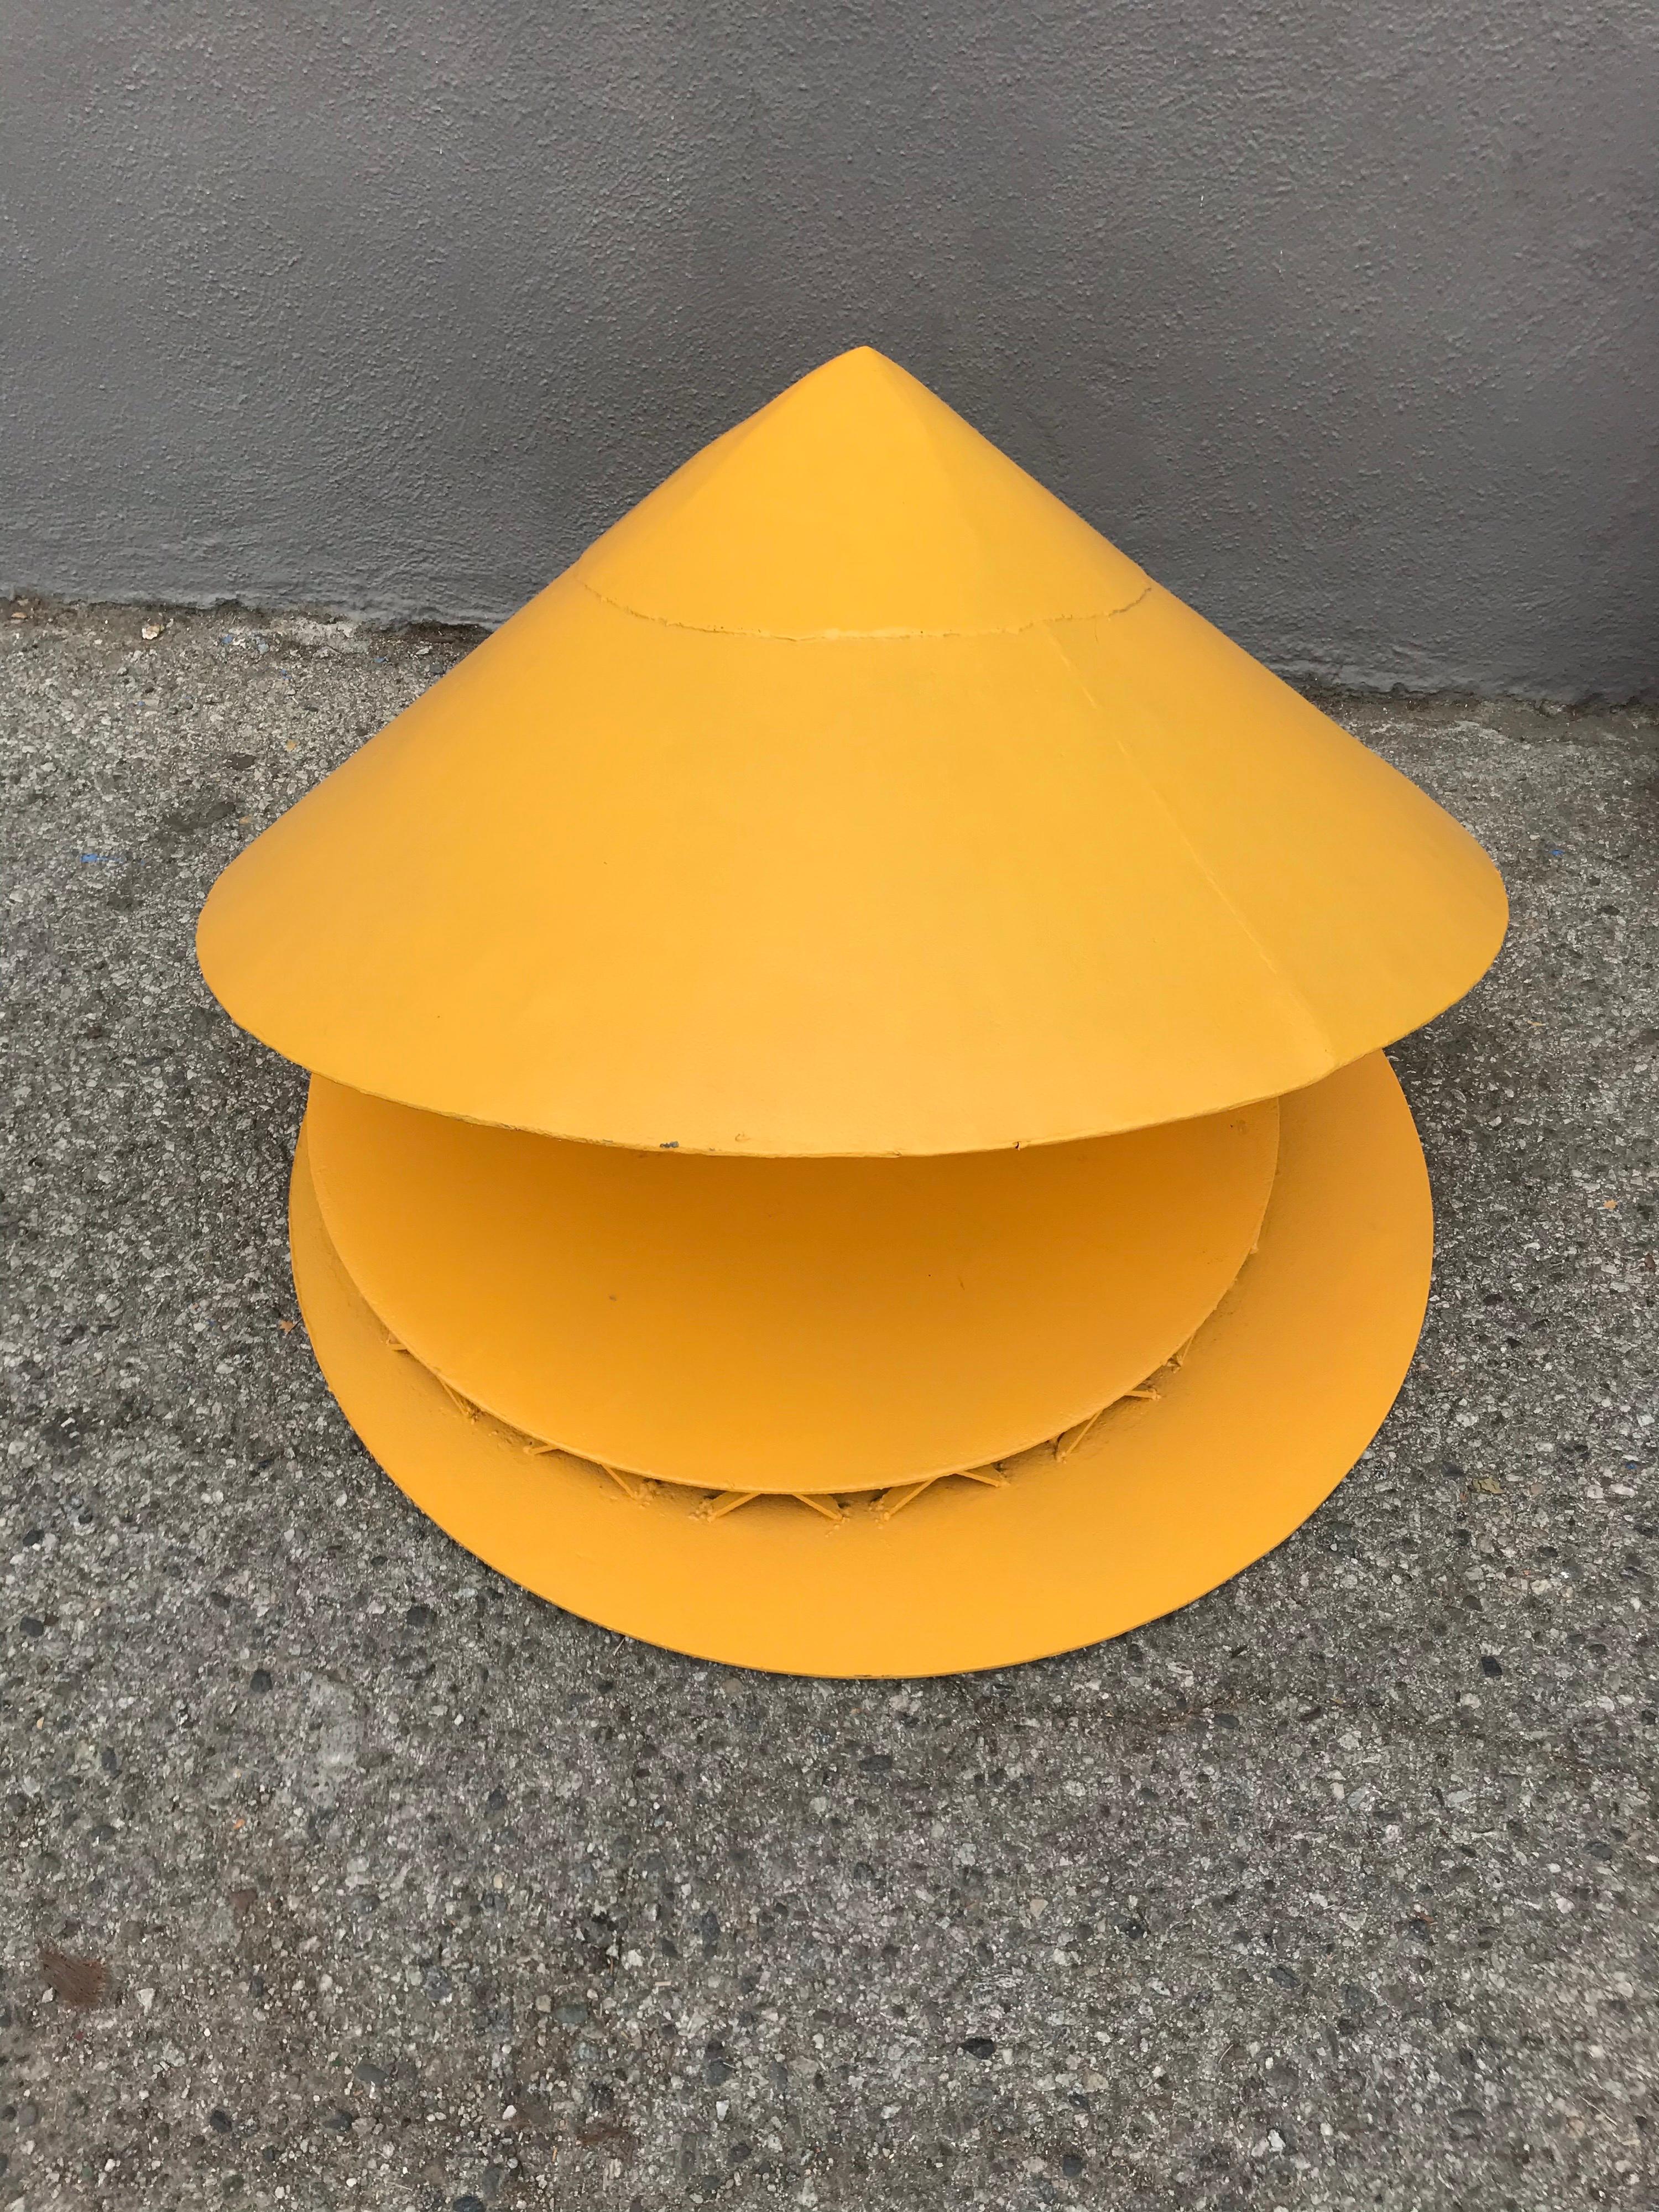 Fun piece of modern art 
There is a solid weighted steel ball inside the saucer that keeps it balanced around the platform.
It will rotate lazily two or three times on the base by pushing it with both hands atop the point.
It has a great scale for a